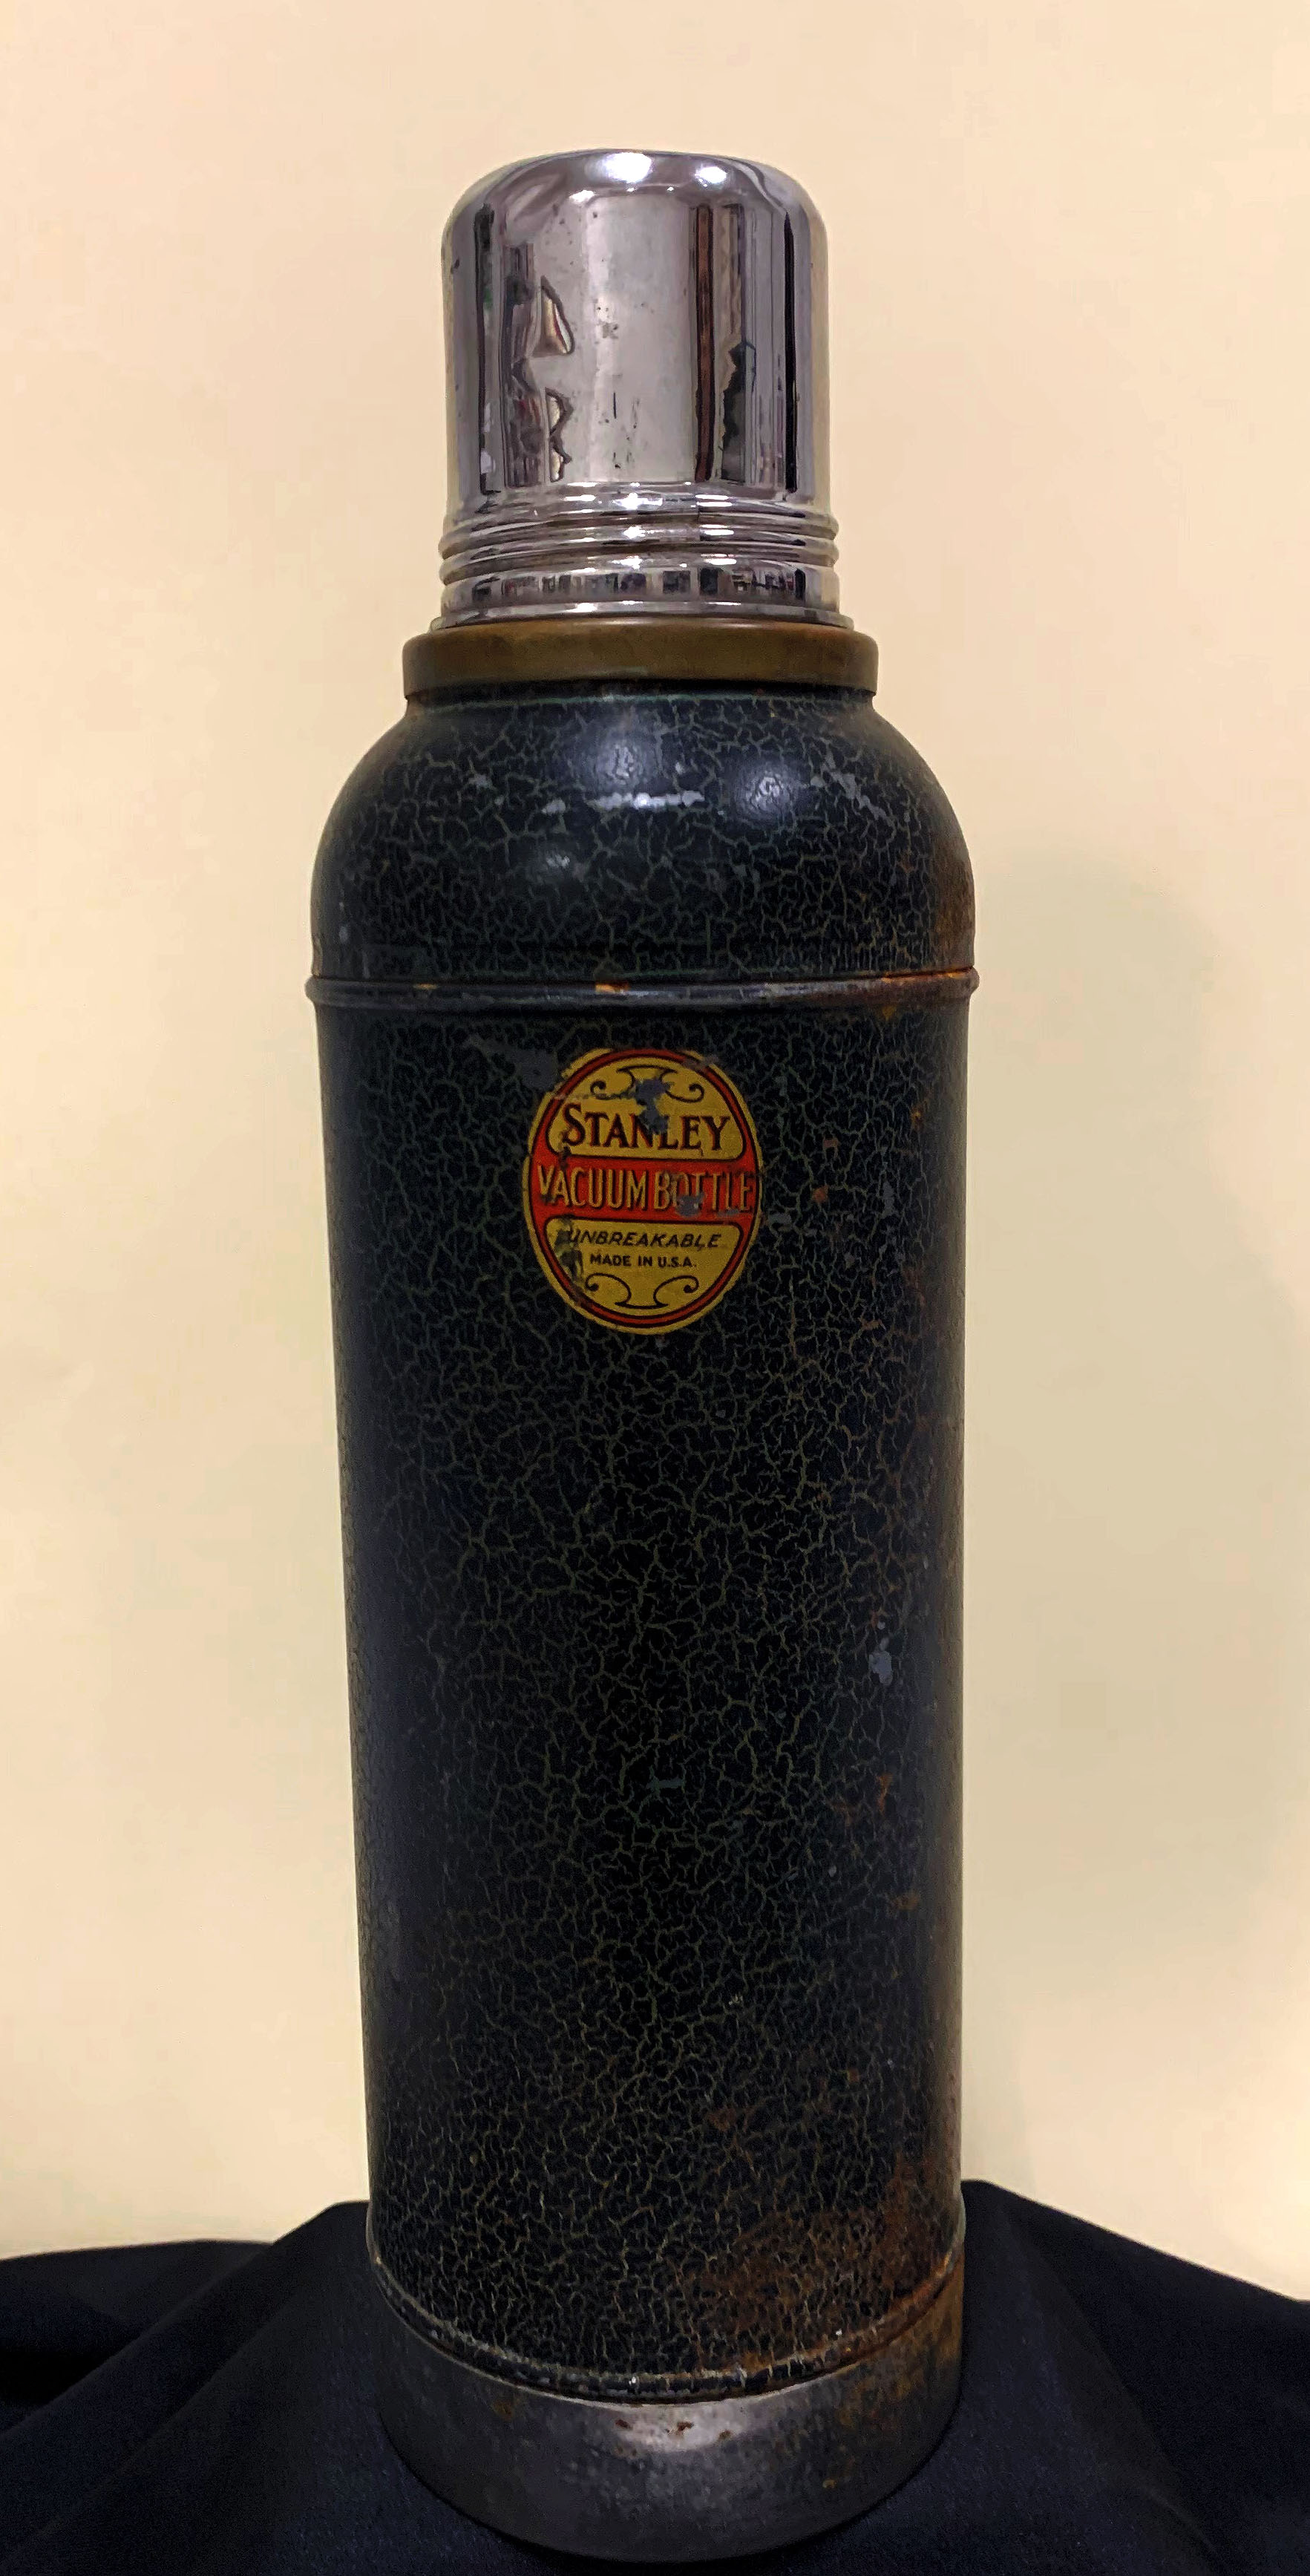 Thermos Used by Amelia Earhart